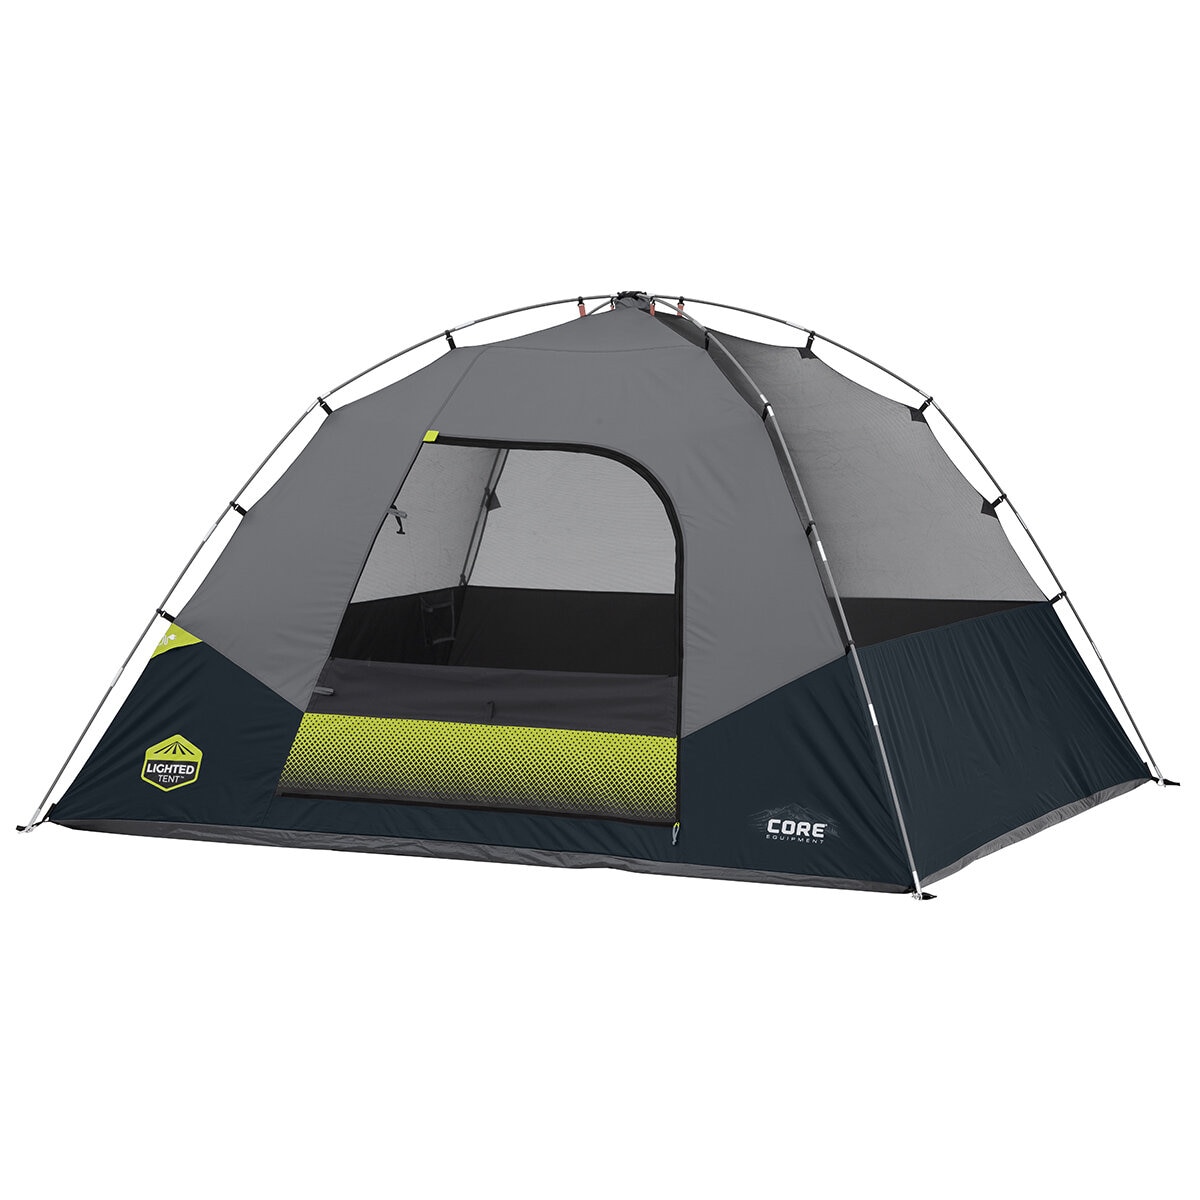 CORE 6 Person Lighted Blockout Tent with Full Rainfly